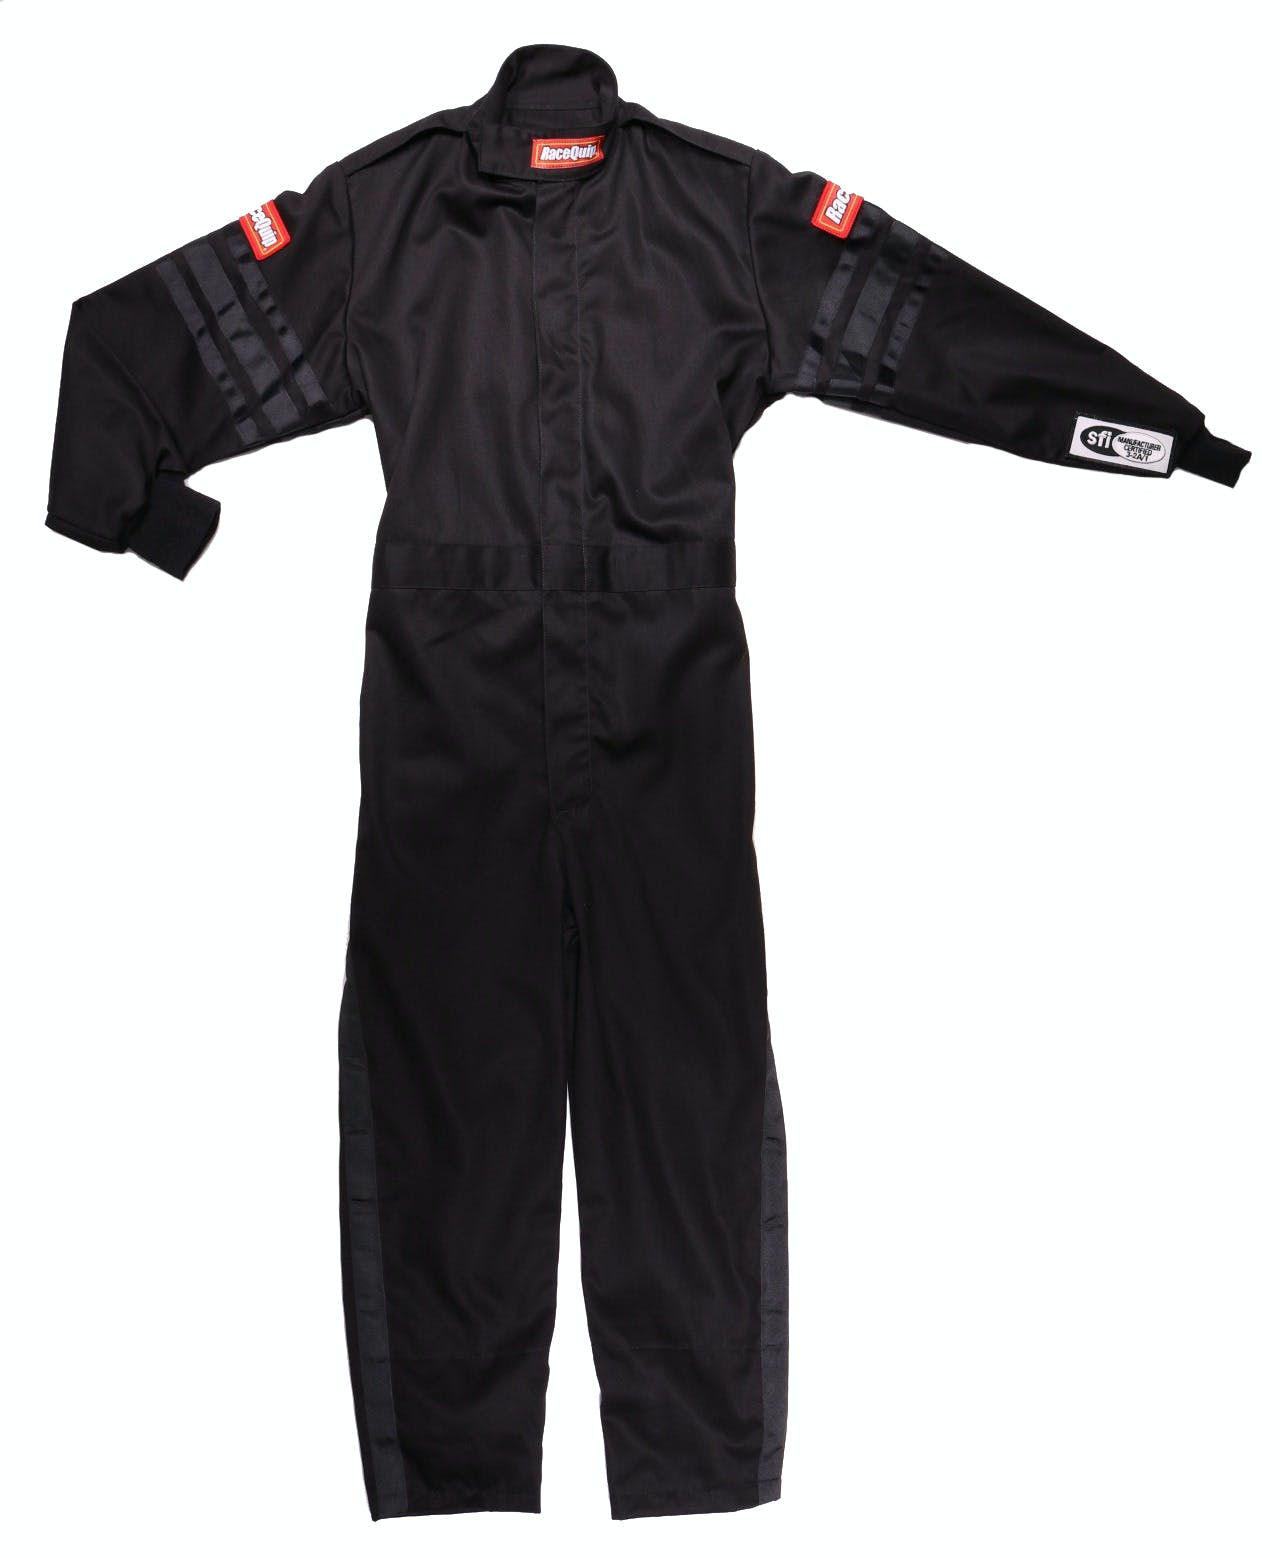 RaceQuip 1959990 SFI-1 Pyrovatex One-Piece Single-Layer Youth Racing Fire Suit (Black/Blue-XXS)